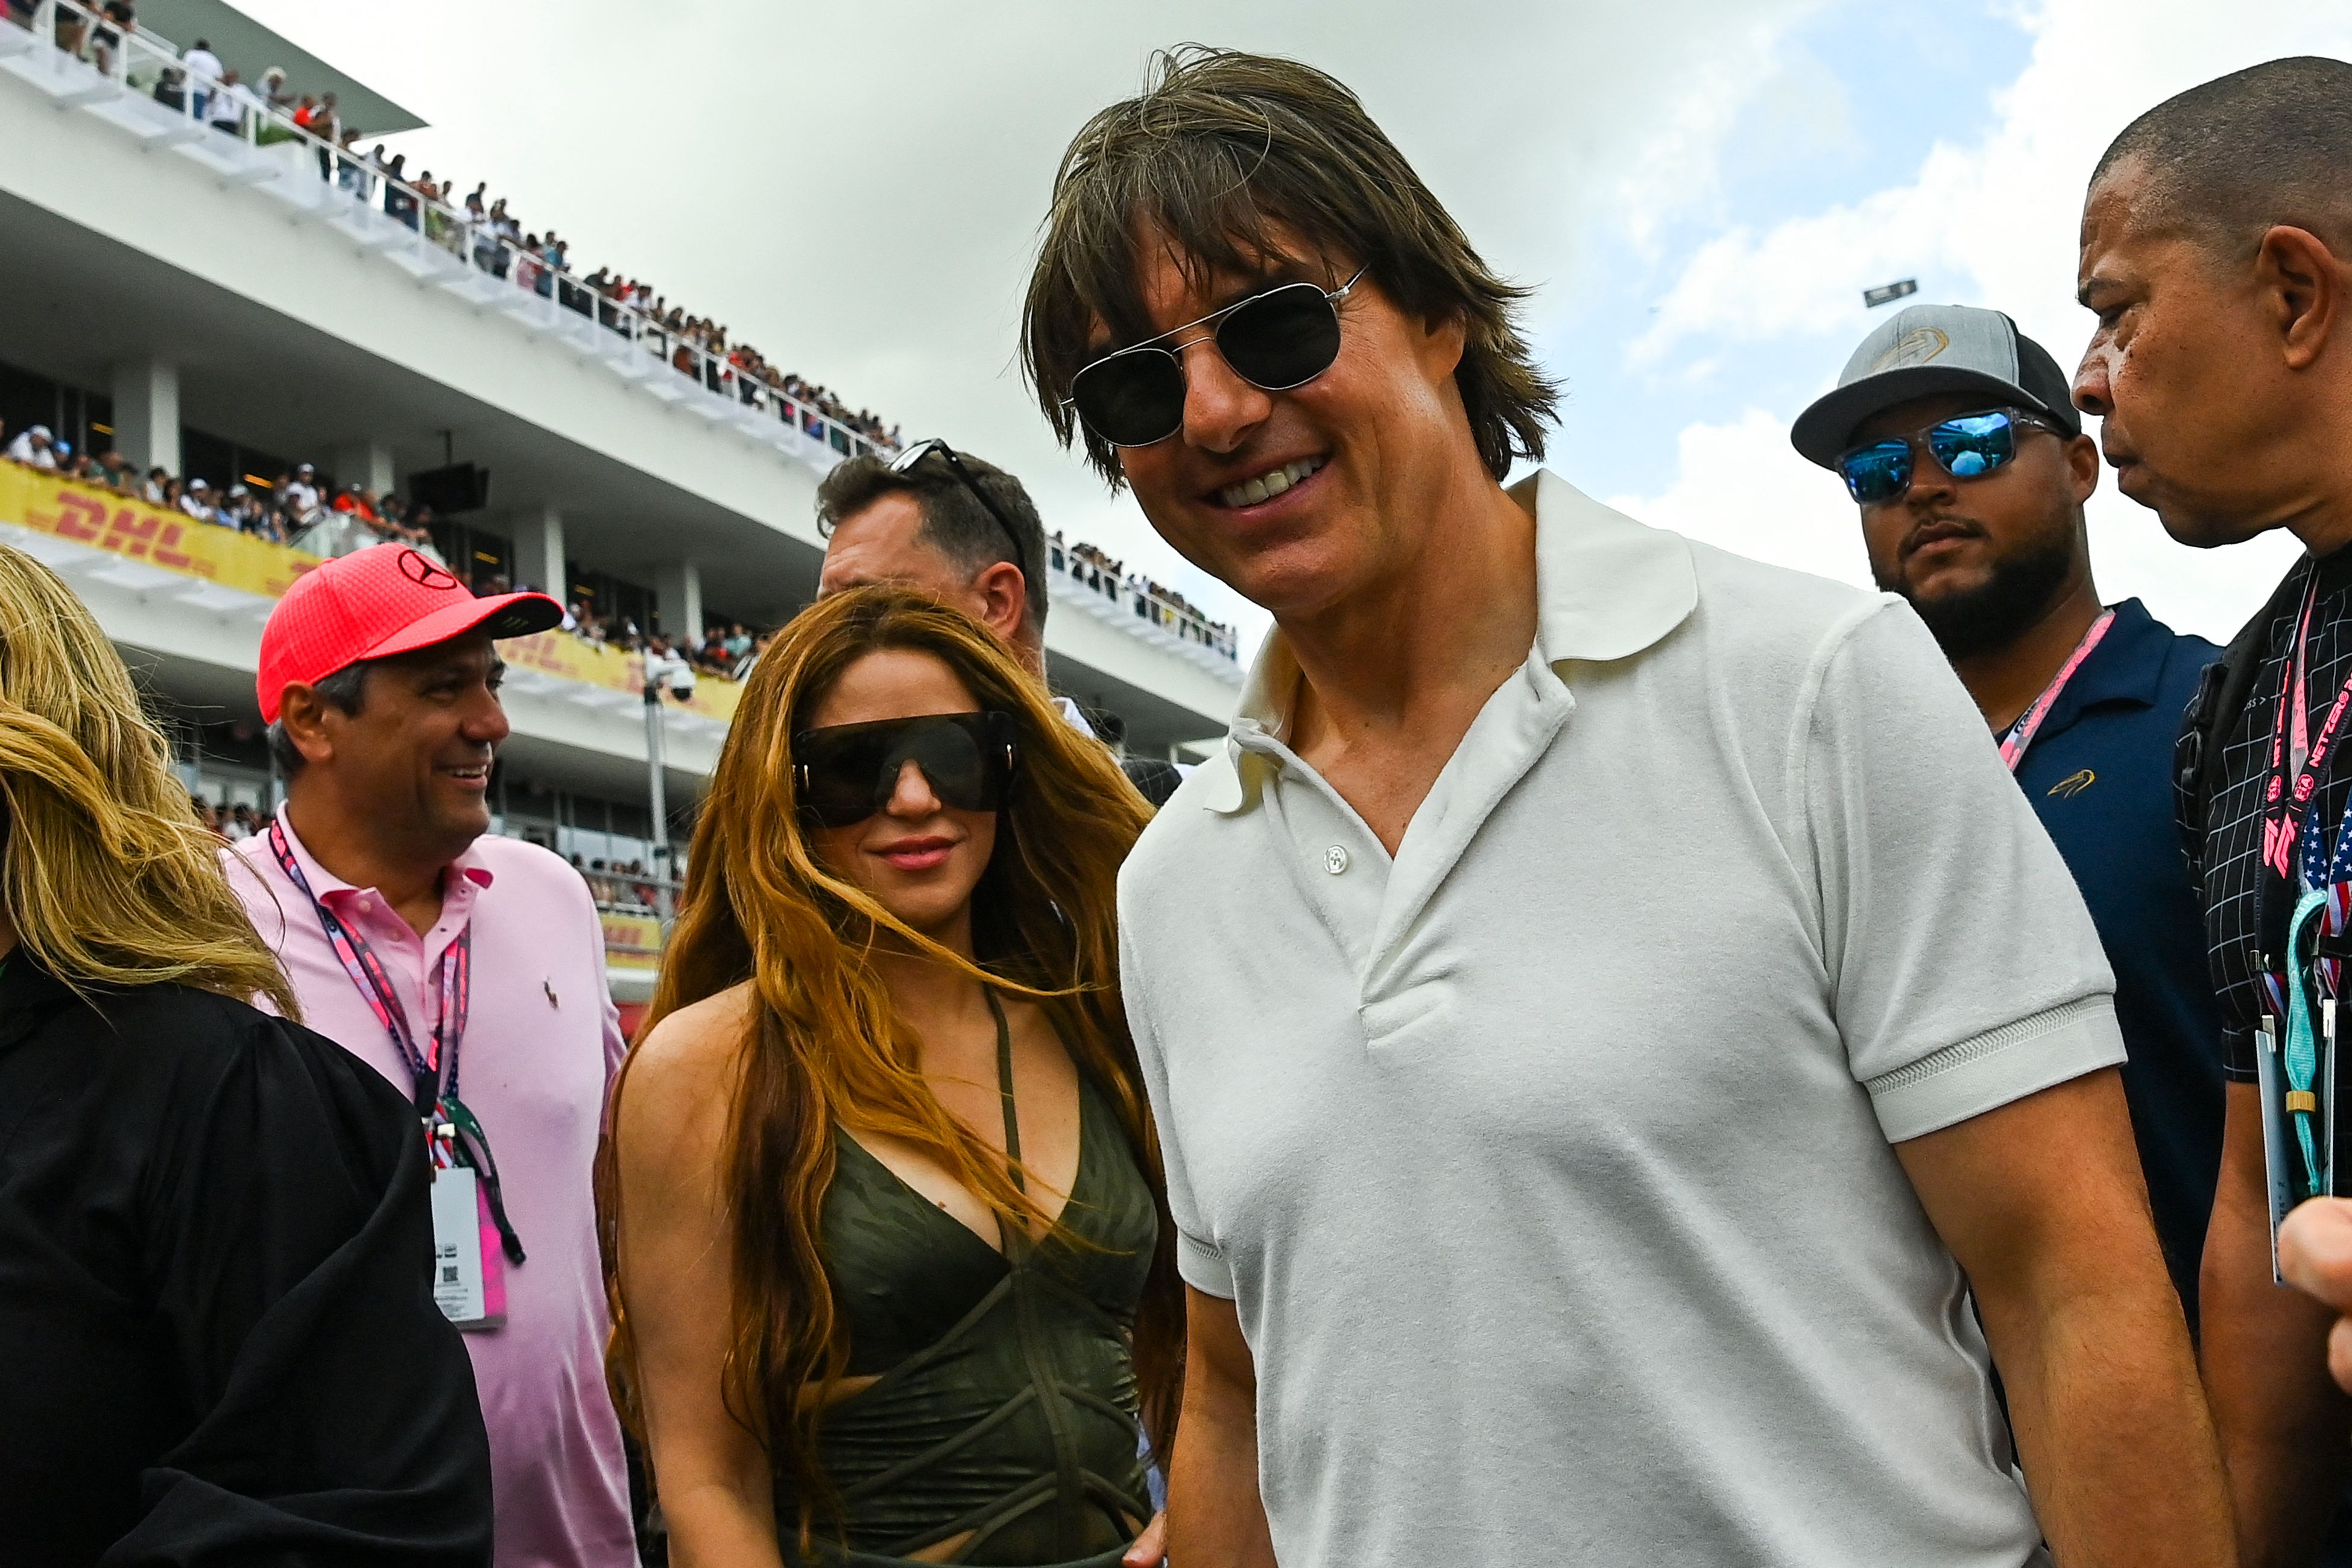 <p>Some surprising romance rumors popped up about <a href="https://www.wonderwall.com/celebrity/profiles/overview/tom-cruise-408.article">Tom Cruise</a> in May 2023 after he was spotted chatting with <a href="https://www.wonderwall.com/celebrity/profiles/overview/shakira-559.article">Shakira</a> at the 2023 Miami Formula One Grand Prix in Florida. Despite looking very friendly, shortly after their public appearance, <a href="https://www.tmz.com/2023/05/12/shakira-not-dating-tom-cruise-f1-lewis-hamilton/">TMZ</a> insisted the two were "just friends" and not dating.</p>